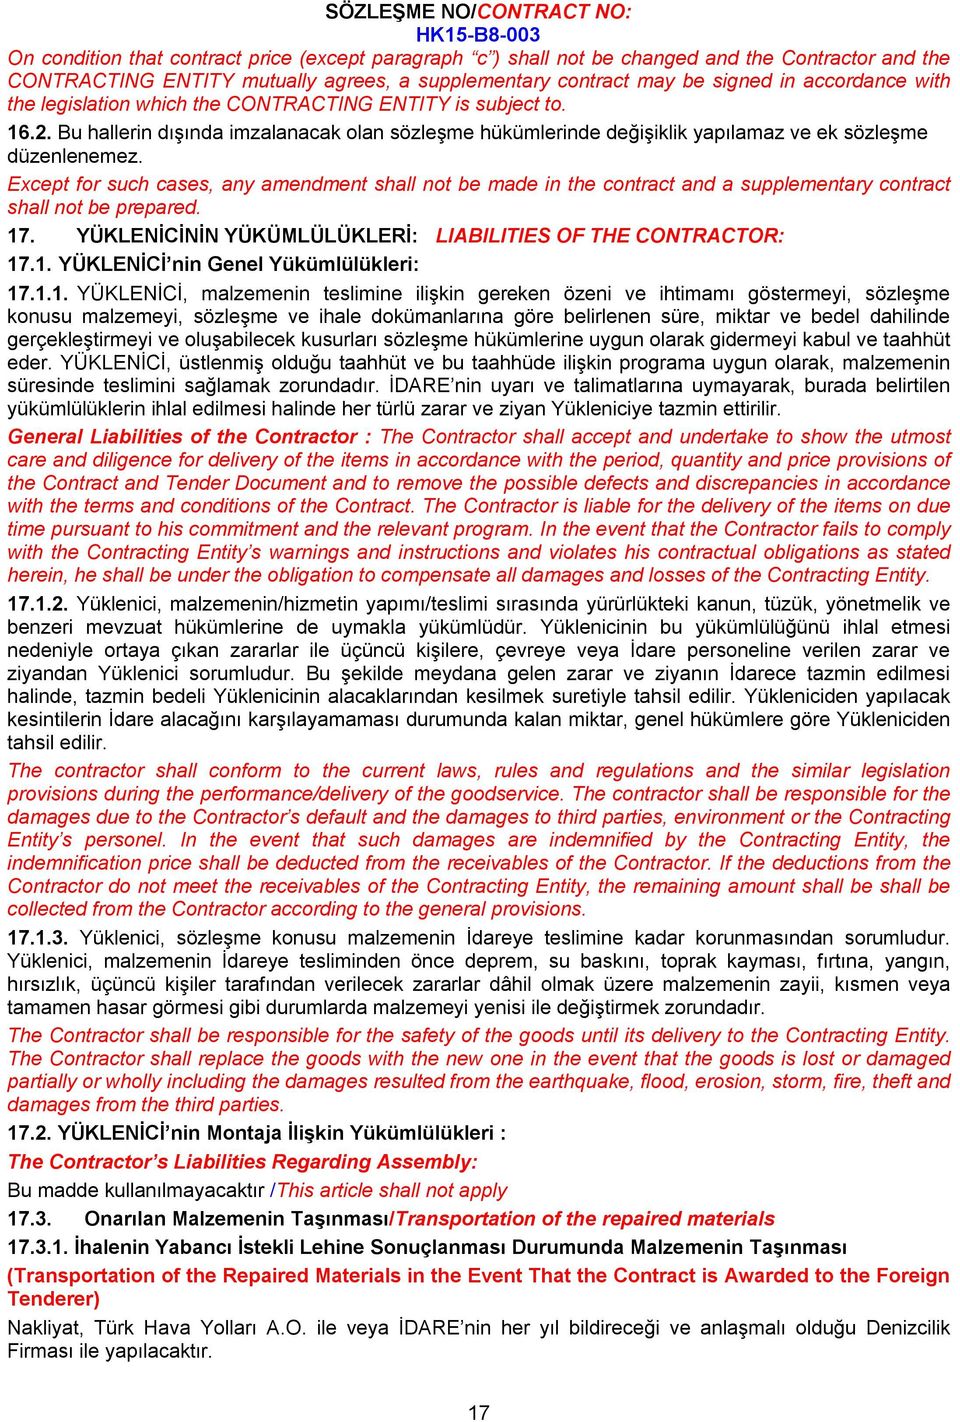 Except for such cases, any amendment shall not be made in the contract and a supplementary contract shall not be prepared. 17. YÜKLENİCİNİN YÜKÜMLÜLÜKLERİ: LIABILITIES OF THE CONTRACTOR: 17.1. YÜKLENİCİ nin Genel Yükümlülükleri: 17.